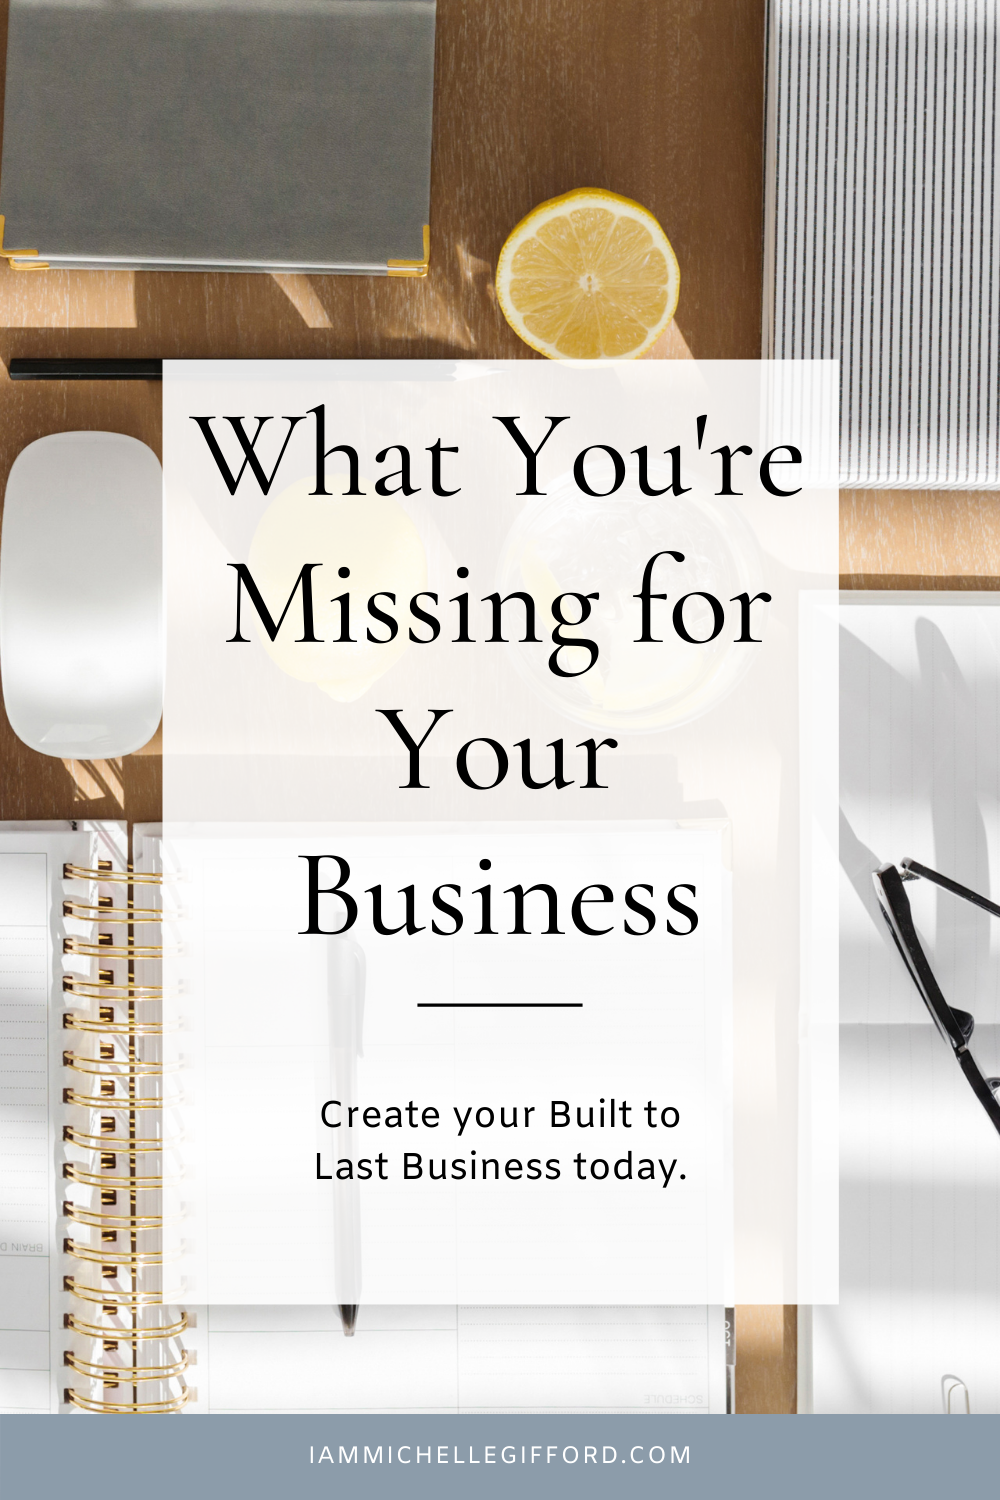 Find out what to do to make your business built to last. www.iammichellegifford.com